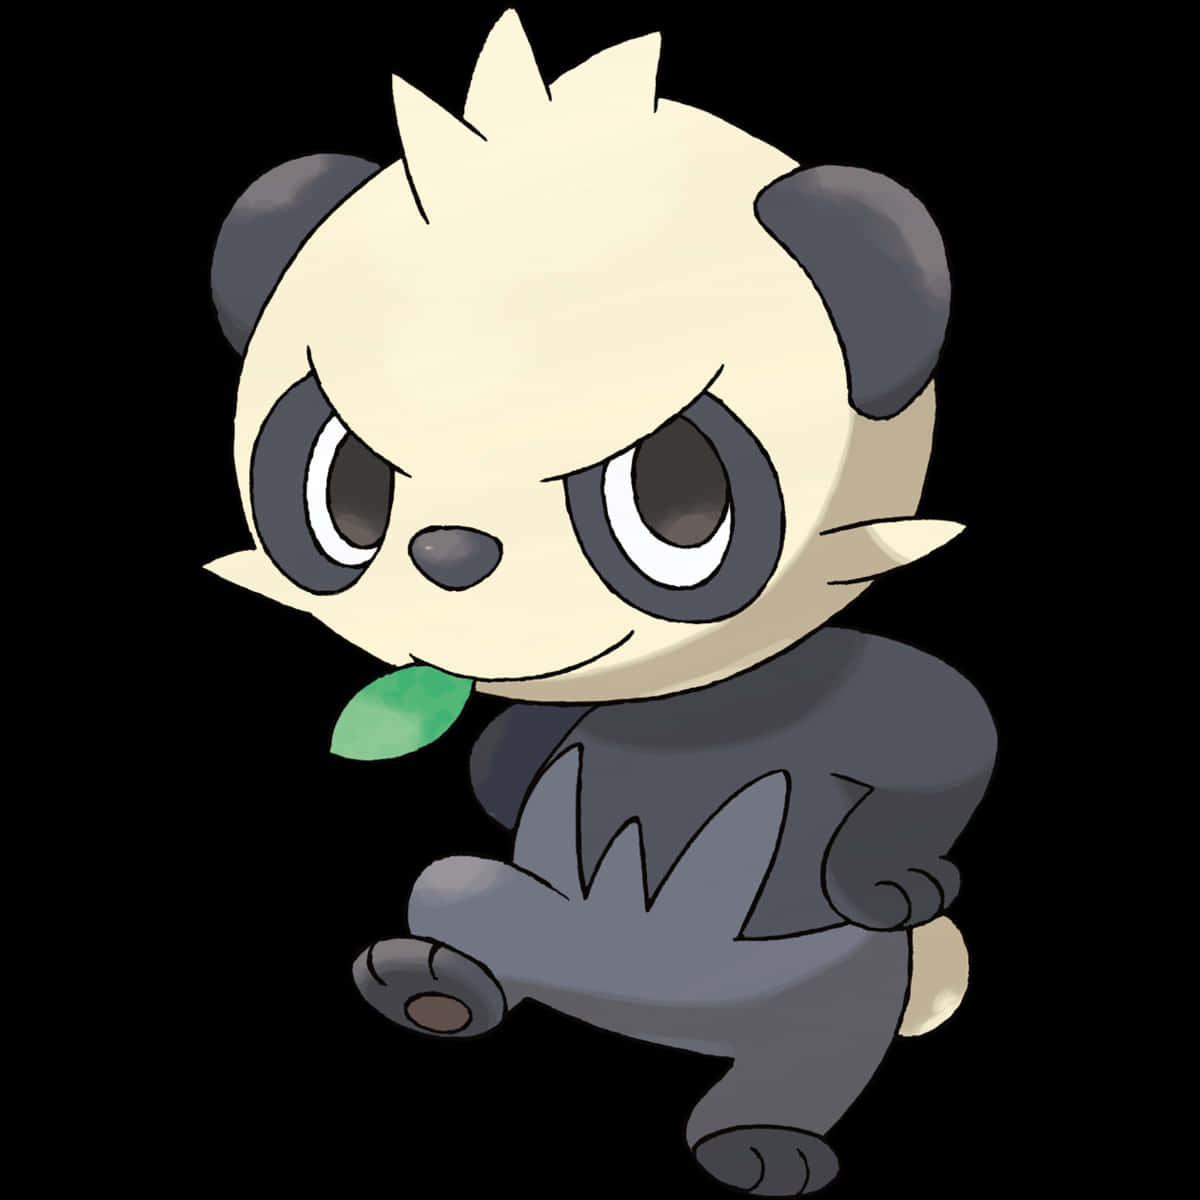 "Pancham Posing Against a White Background" Wallpaper